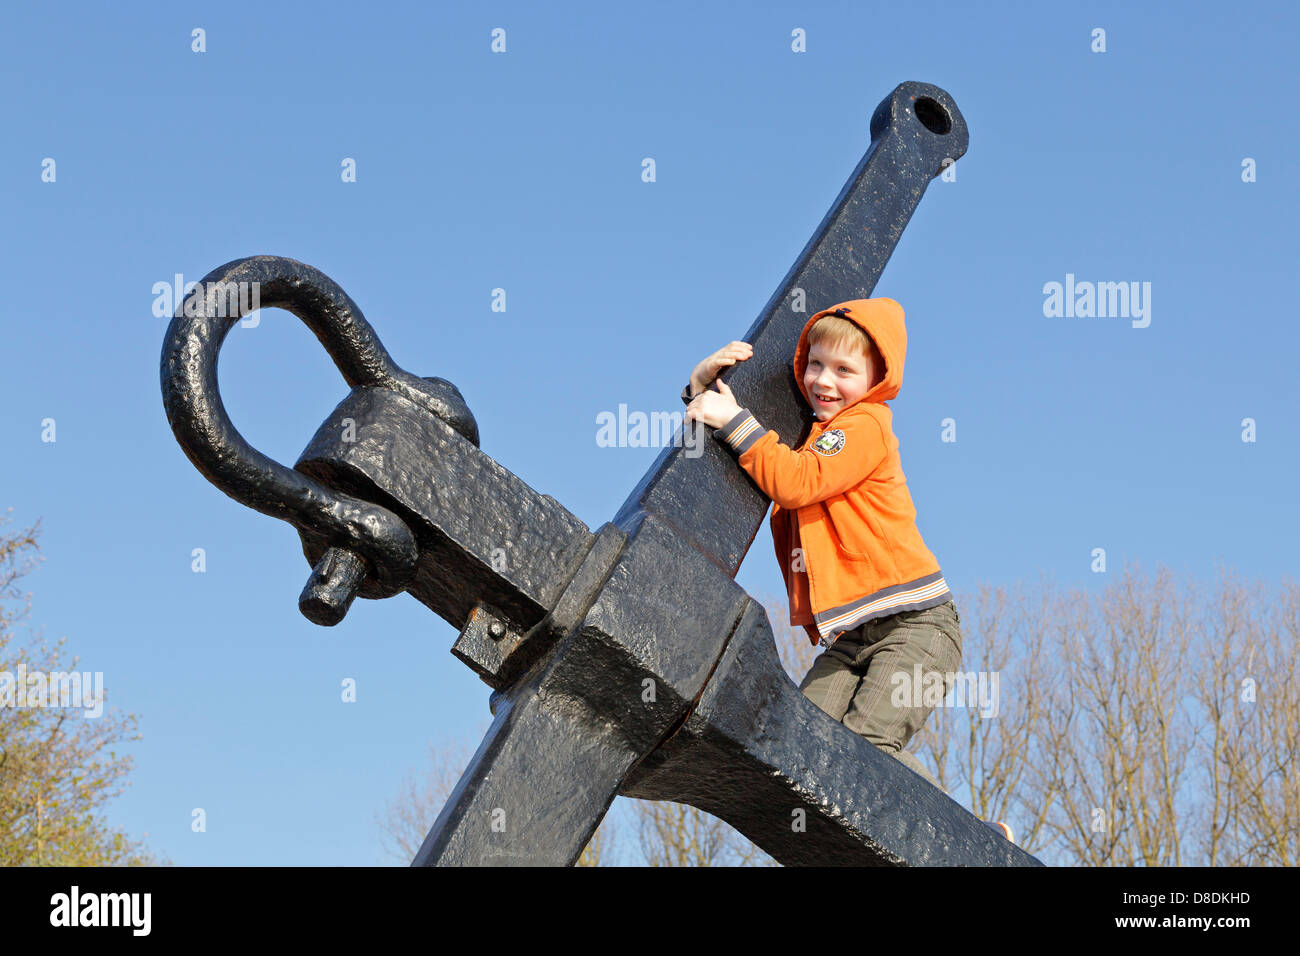 young boy climbing an anchor, Privall, Travemuende, Schleswig-Holstein, Germany Stock Photo